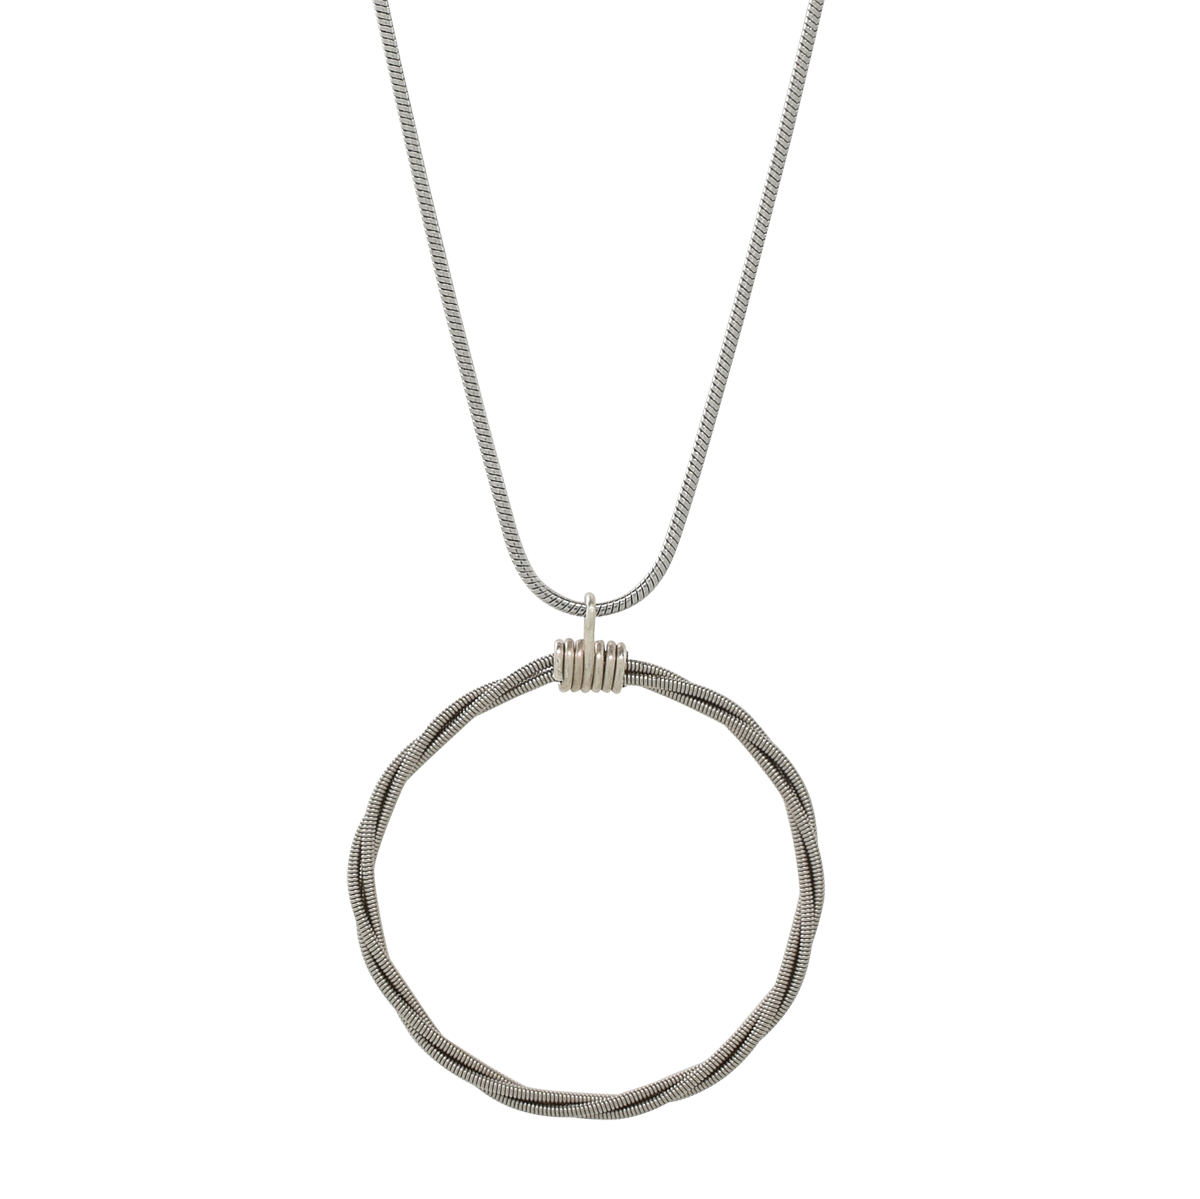 Song Circle Necklace